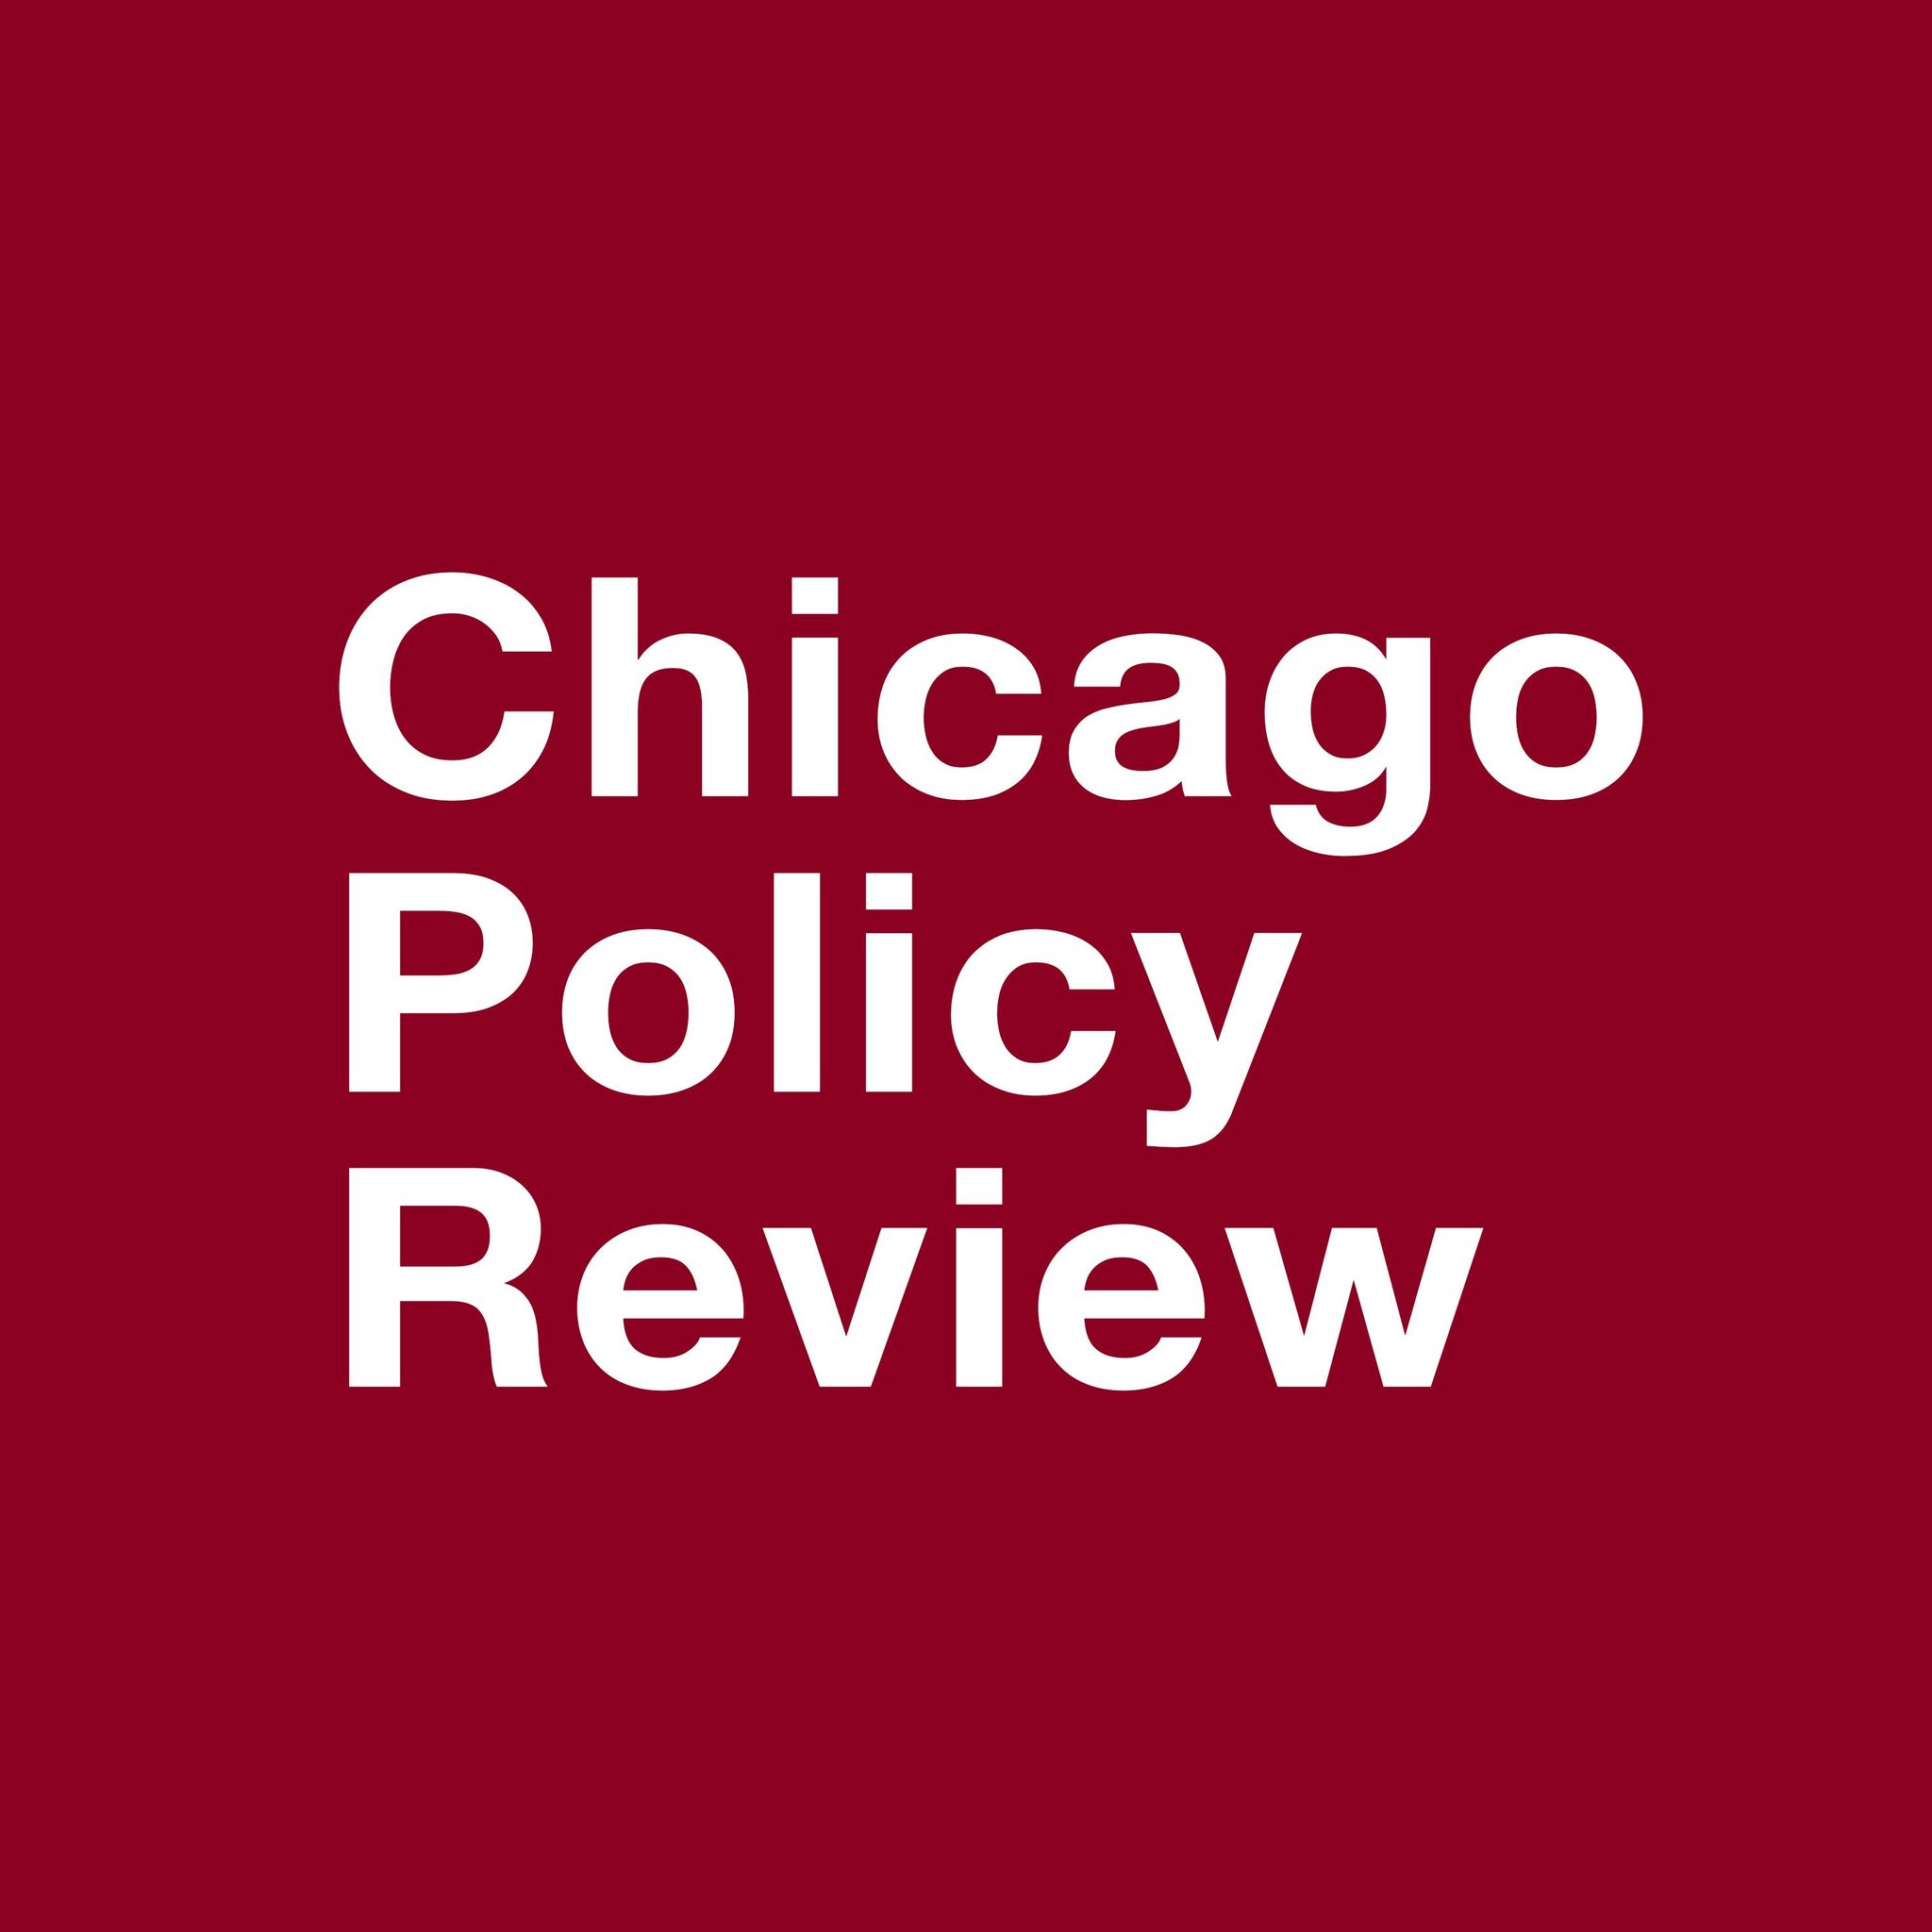 Chicago Policy Review